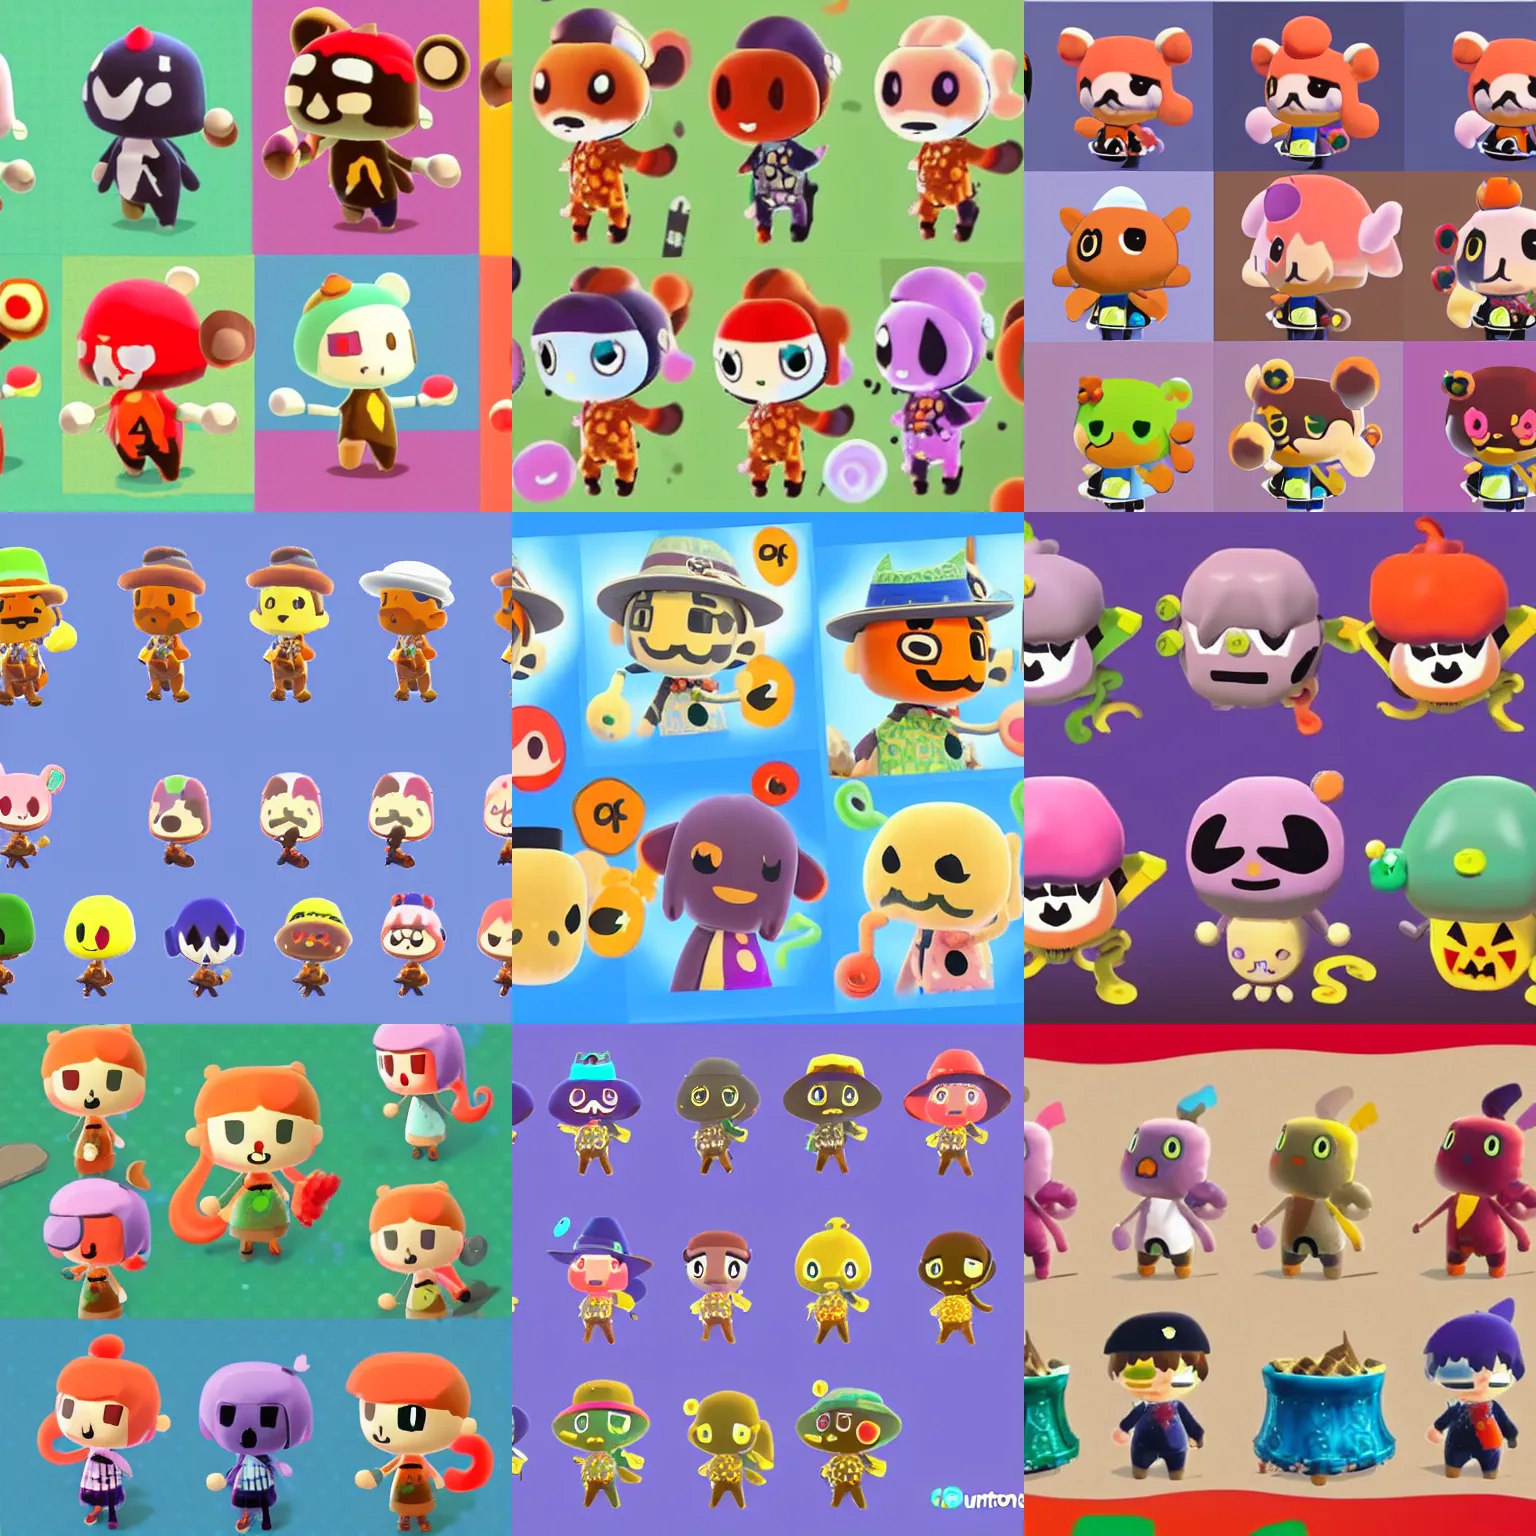 Prompt: concepts of new colorful octopi animal crossing villagers by nintendo that only show up on halloween